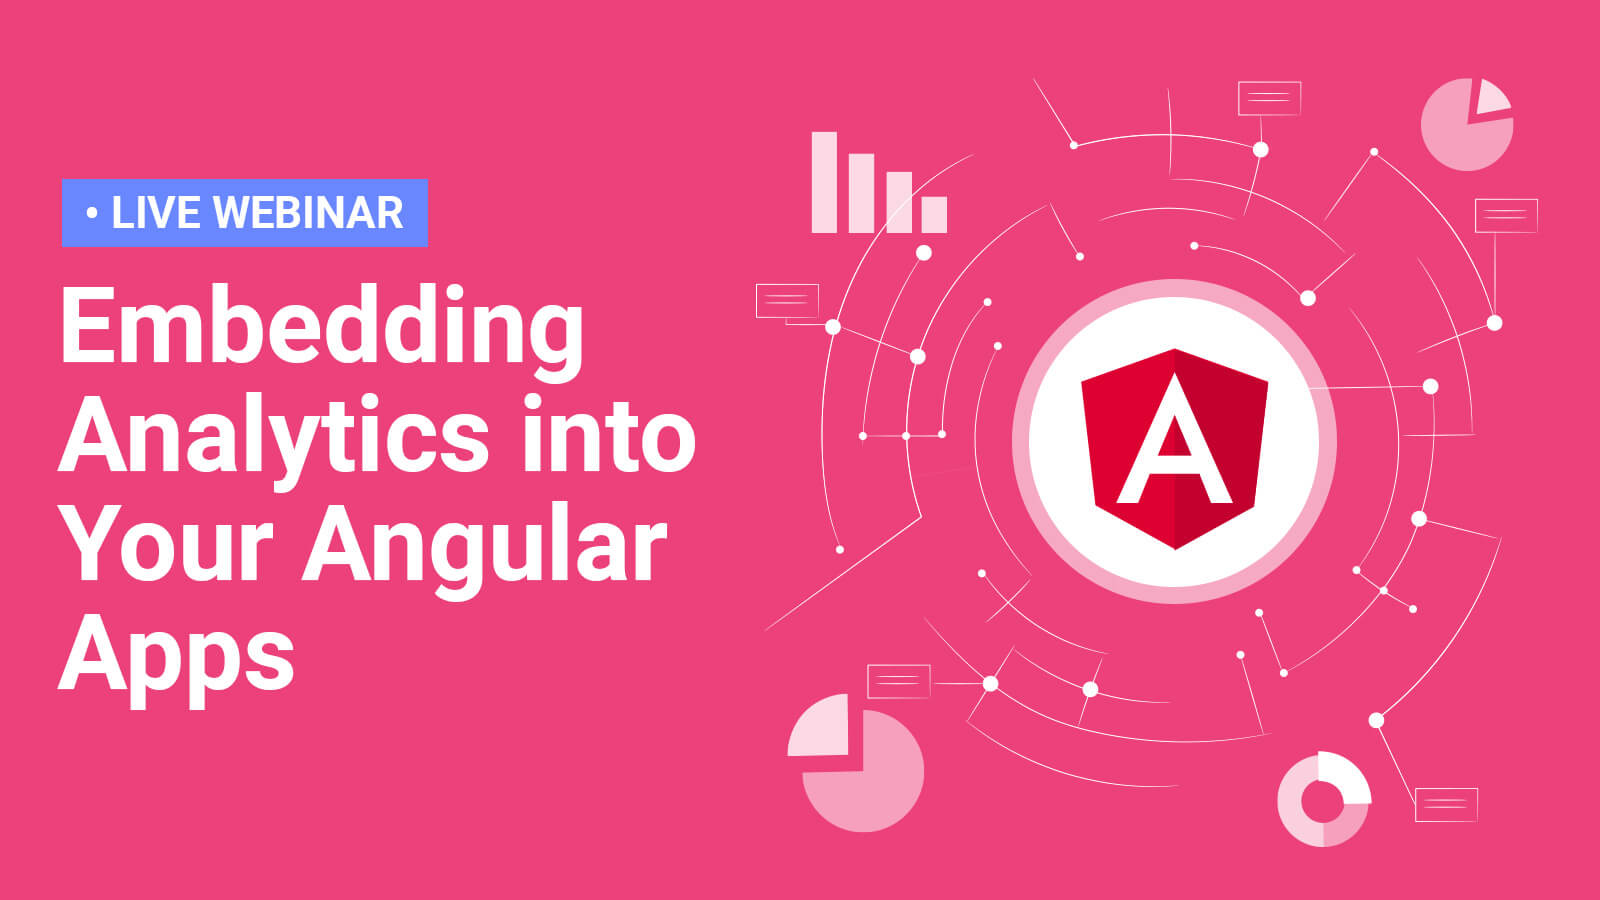 Learn how to get embedded analytics into your Angular Applications